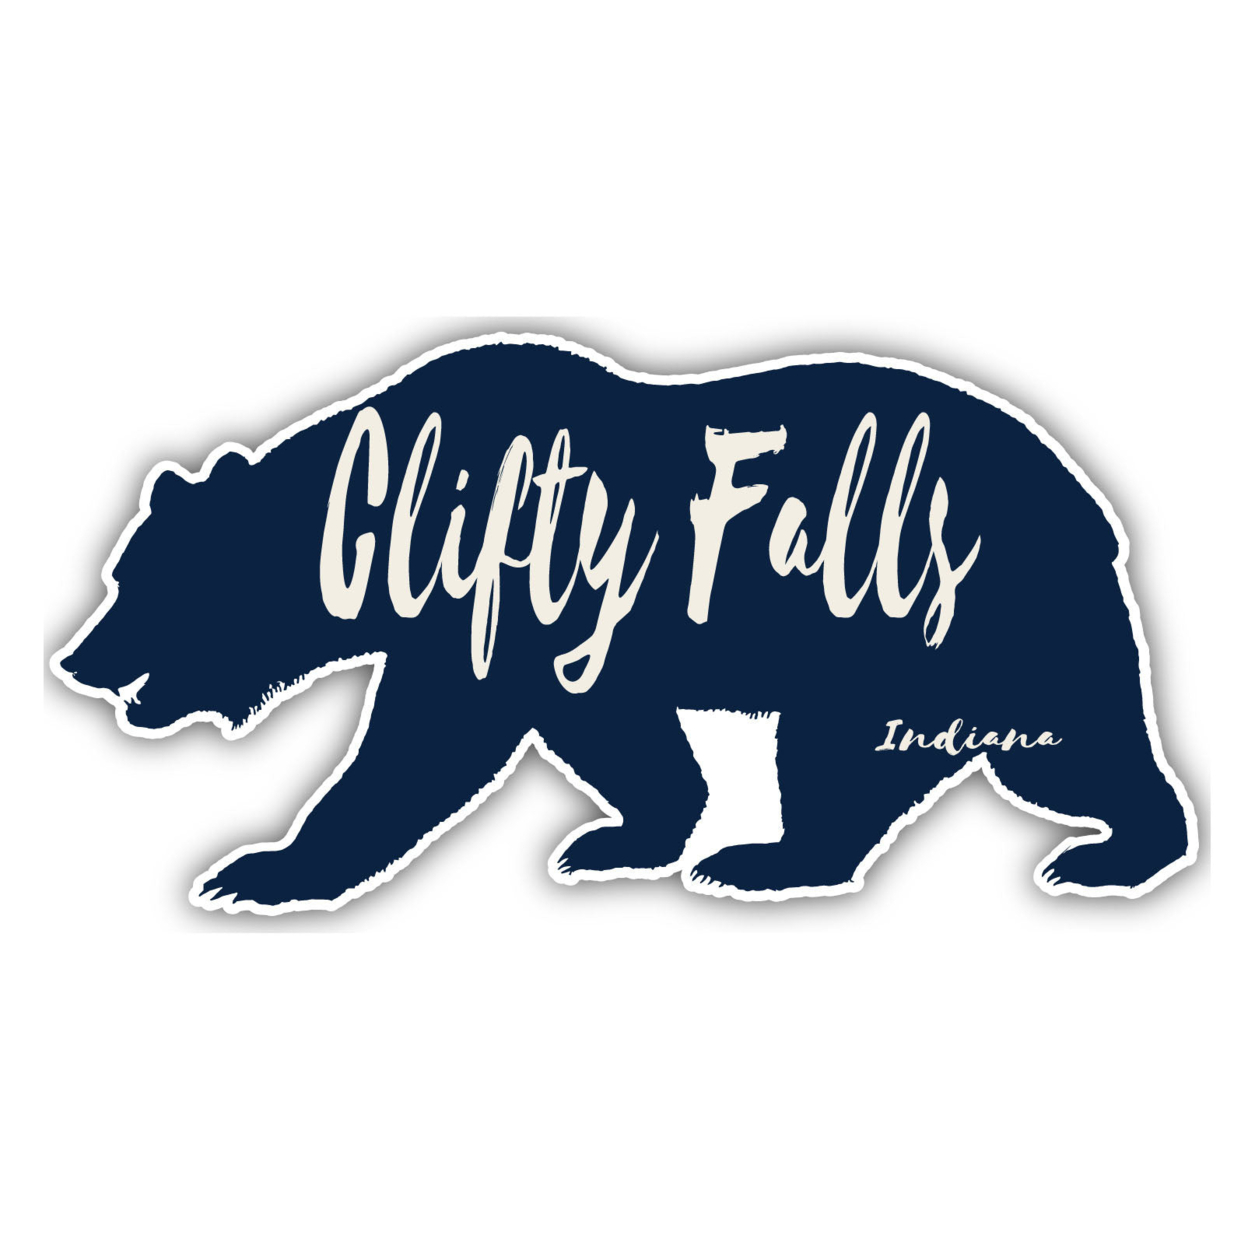 Clifty Falls Indiana Souvenir Decorative Stickers (Choose Theme And Size) - 4-Pack, 4-Inch, Bear